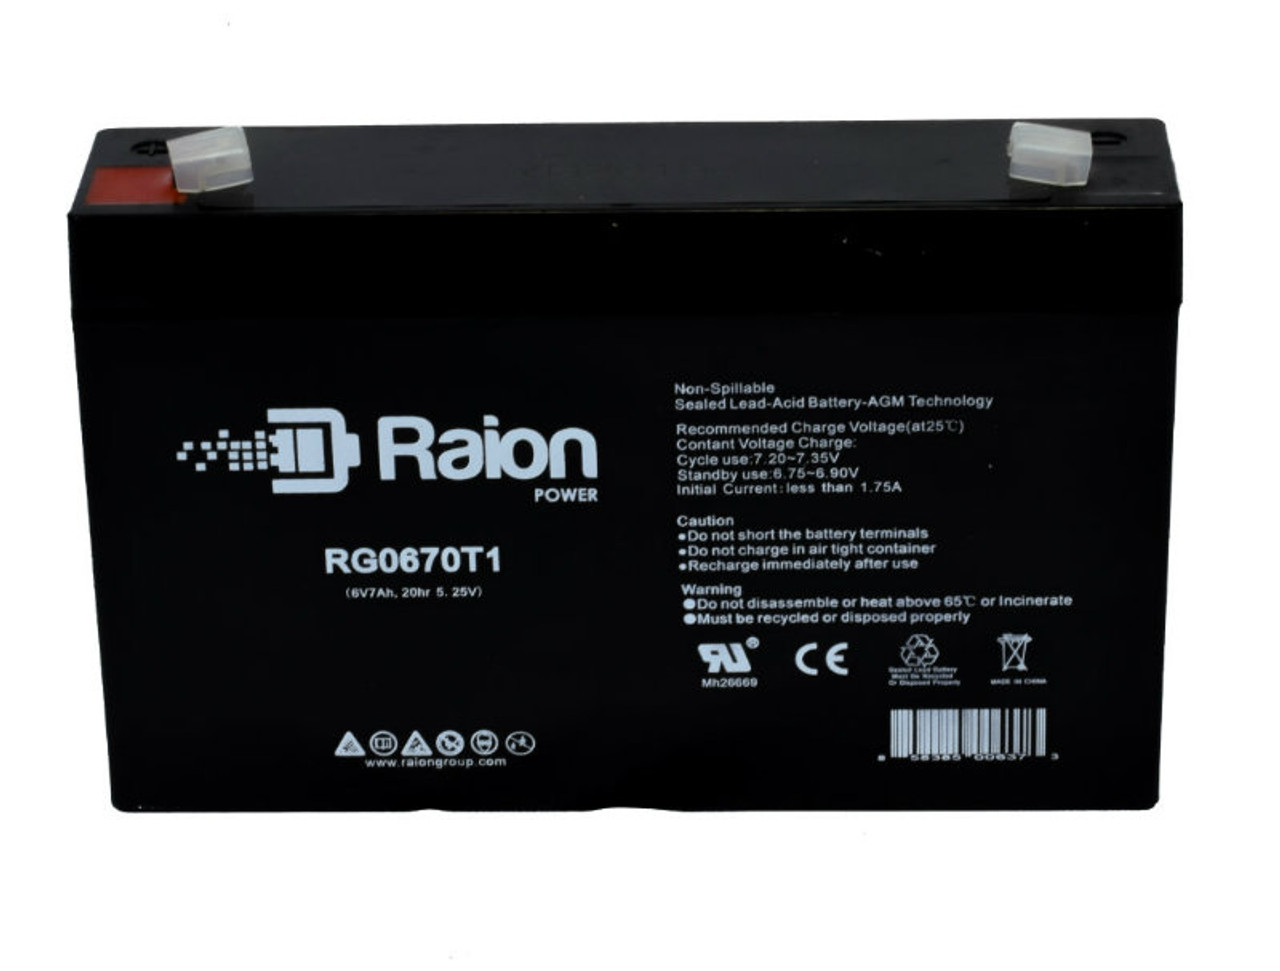 Raion Power RG0670T1 Replacement Battery Cartridge for Pace Tech Vitalmax Systems 4